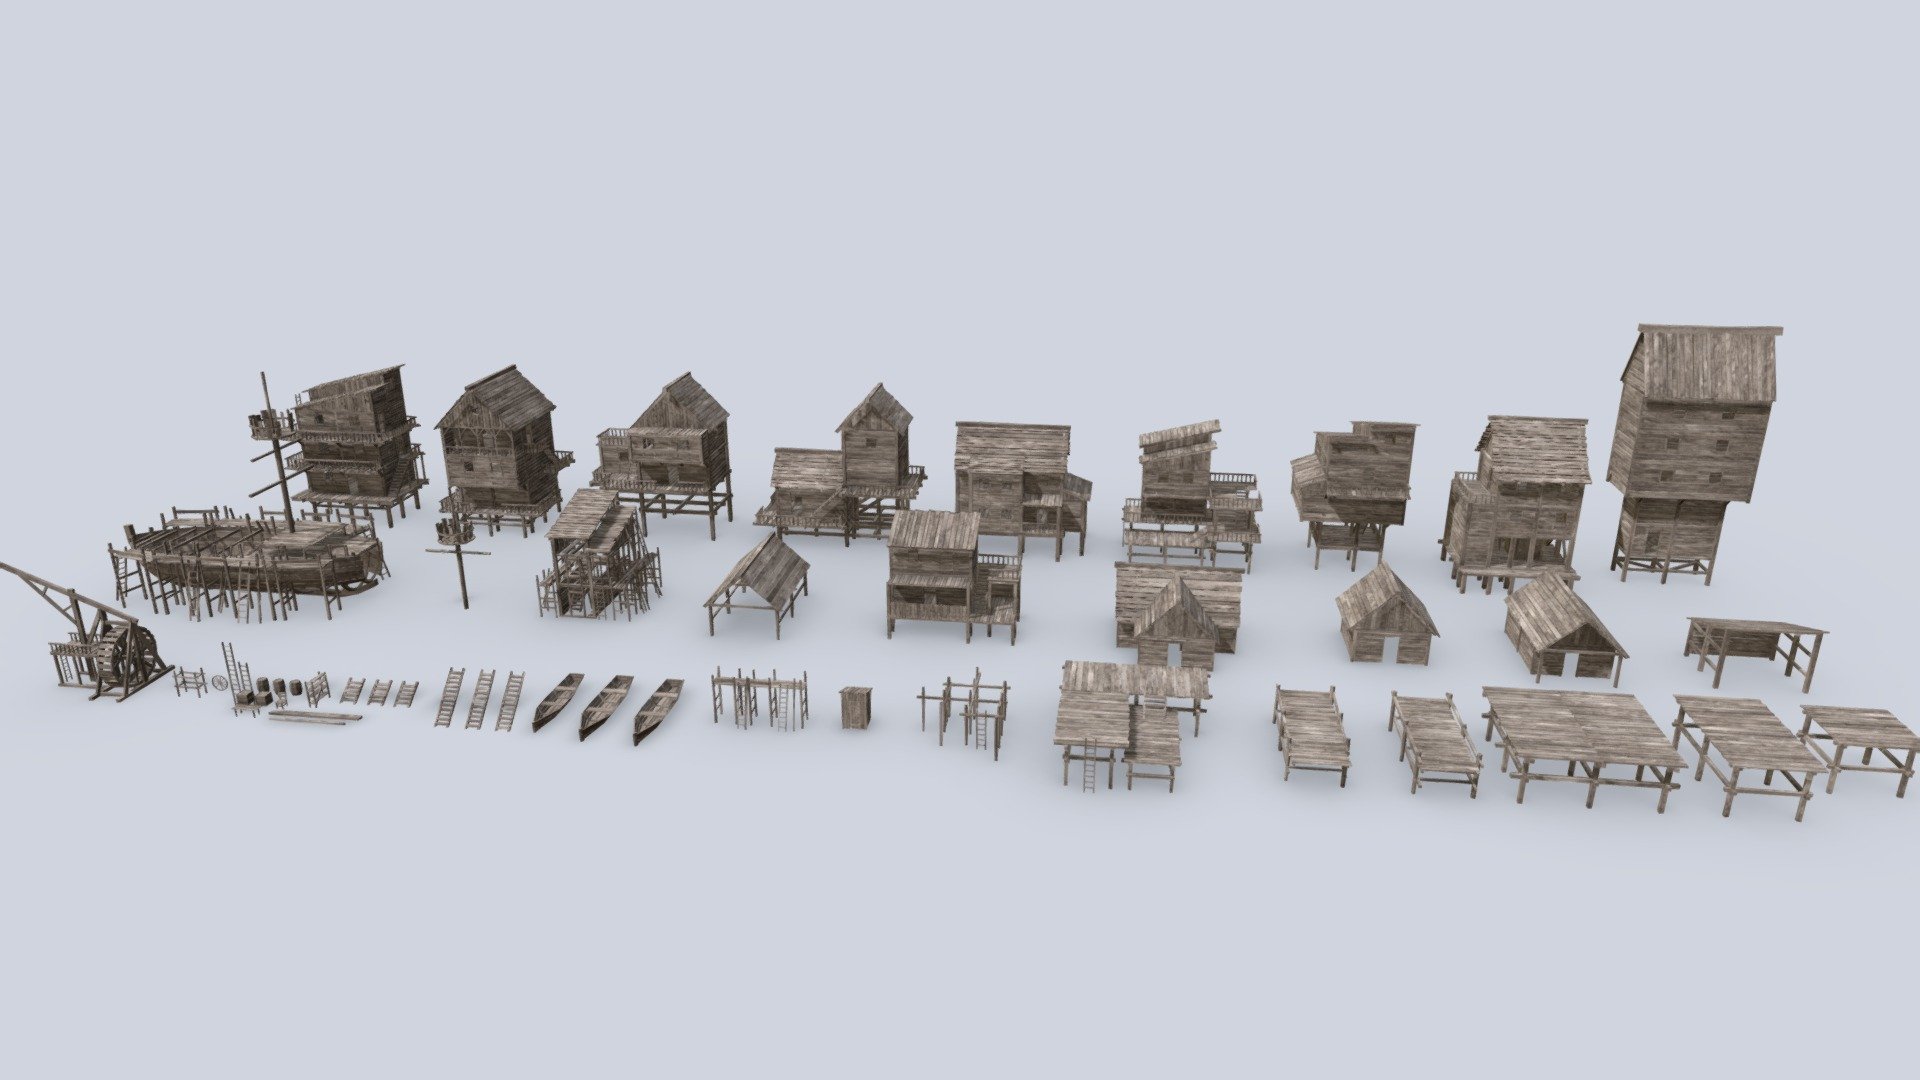 This modular set allows you to create pirate town,fishing town or any medieval scenes of cities.
The set uses seamless and tiled textures, so you can easily apply your own texture to get your own design and look. Every part is neat and polished. Clean wireframe.Every detail is worked out by hand.Designed to be modifiable.Includes 16 wooden buildings,barrels, boats, crates and other furnishings. In total 54 objects. The model is suitable for creating a game. The model is detailed inside and out.
Purchase:
https://www.artstation.com/a/19958225 - Pirate Town Pack - 3D model by Crazy_8 (@korboleevd) 3d model